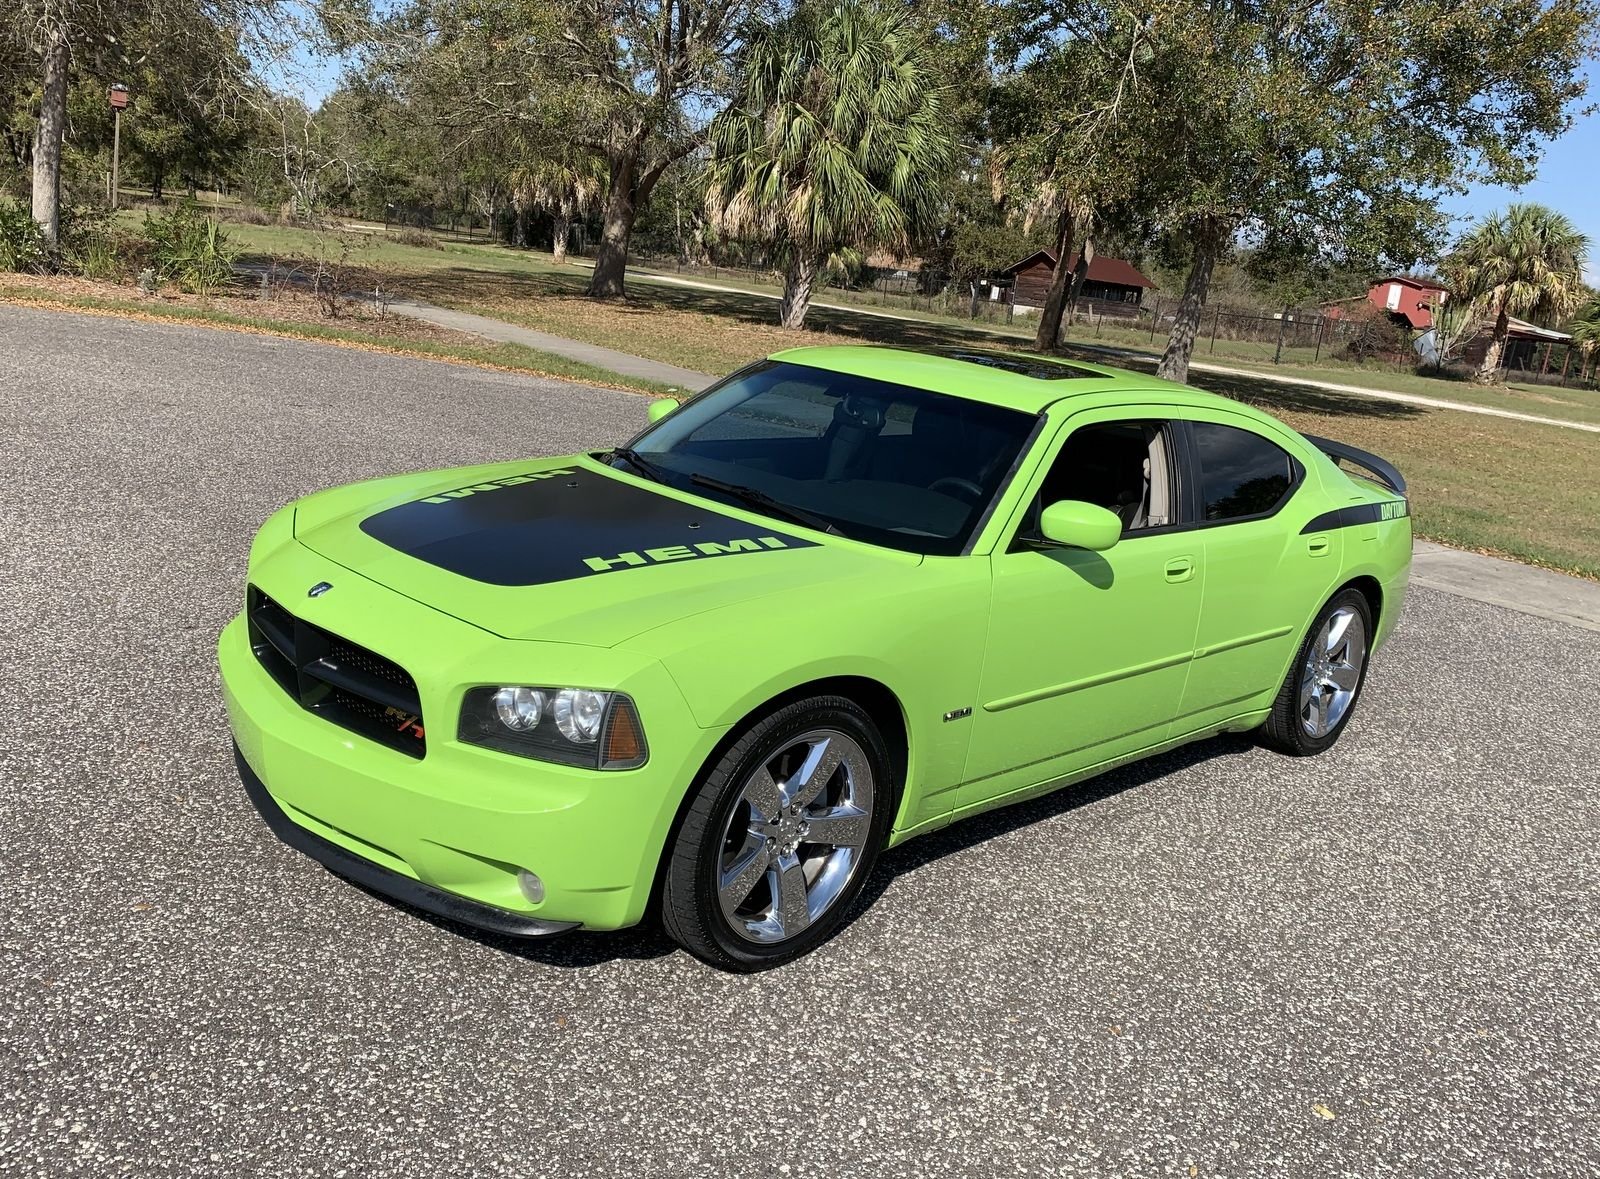 2007 Dodge Charger | PJ's Auto World Classic Cars for Sale